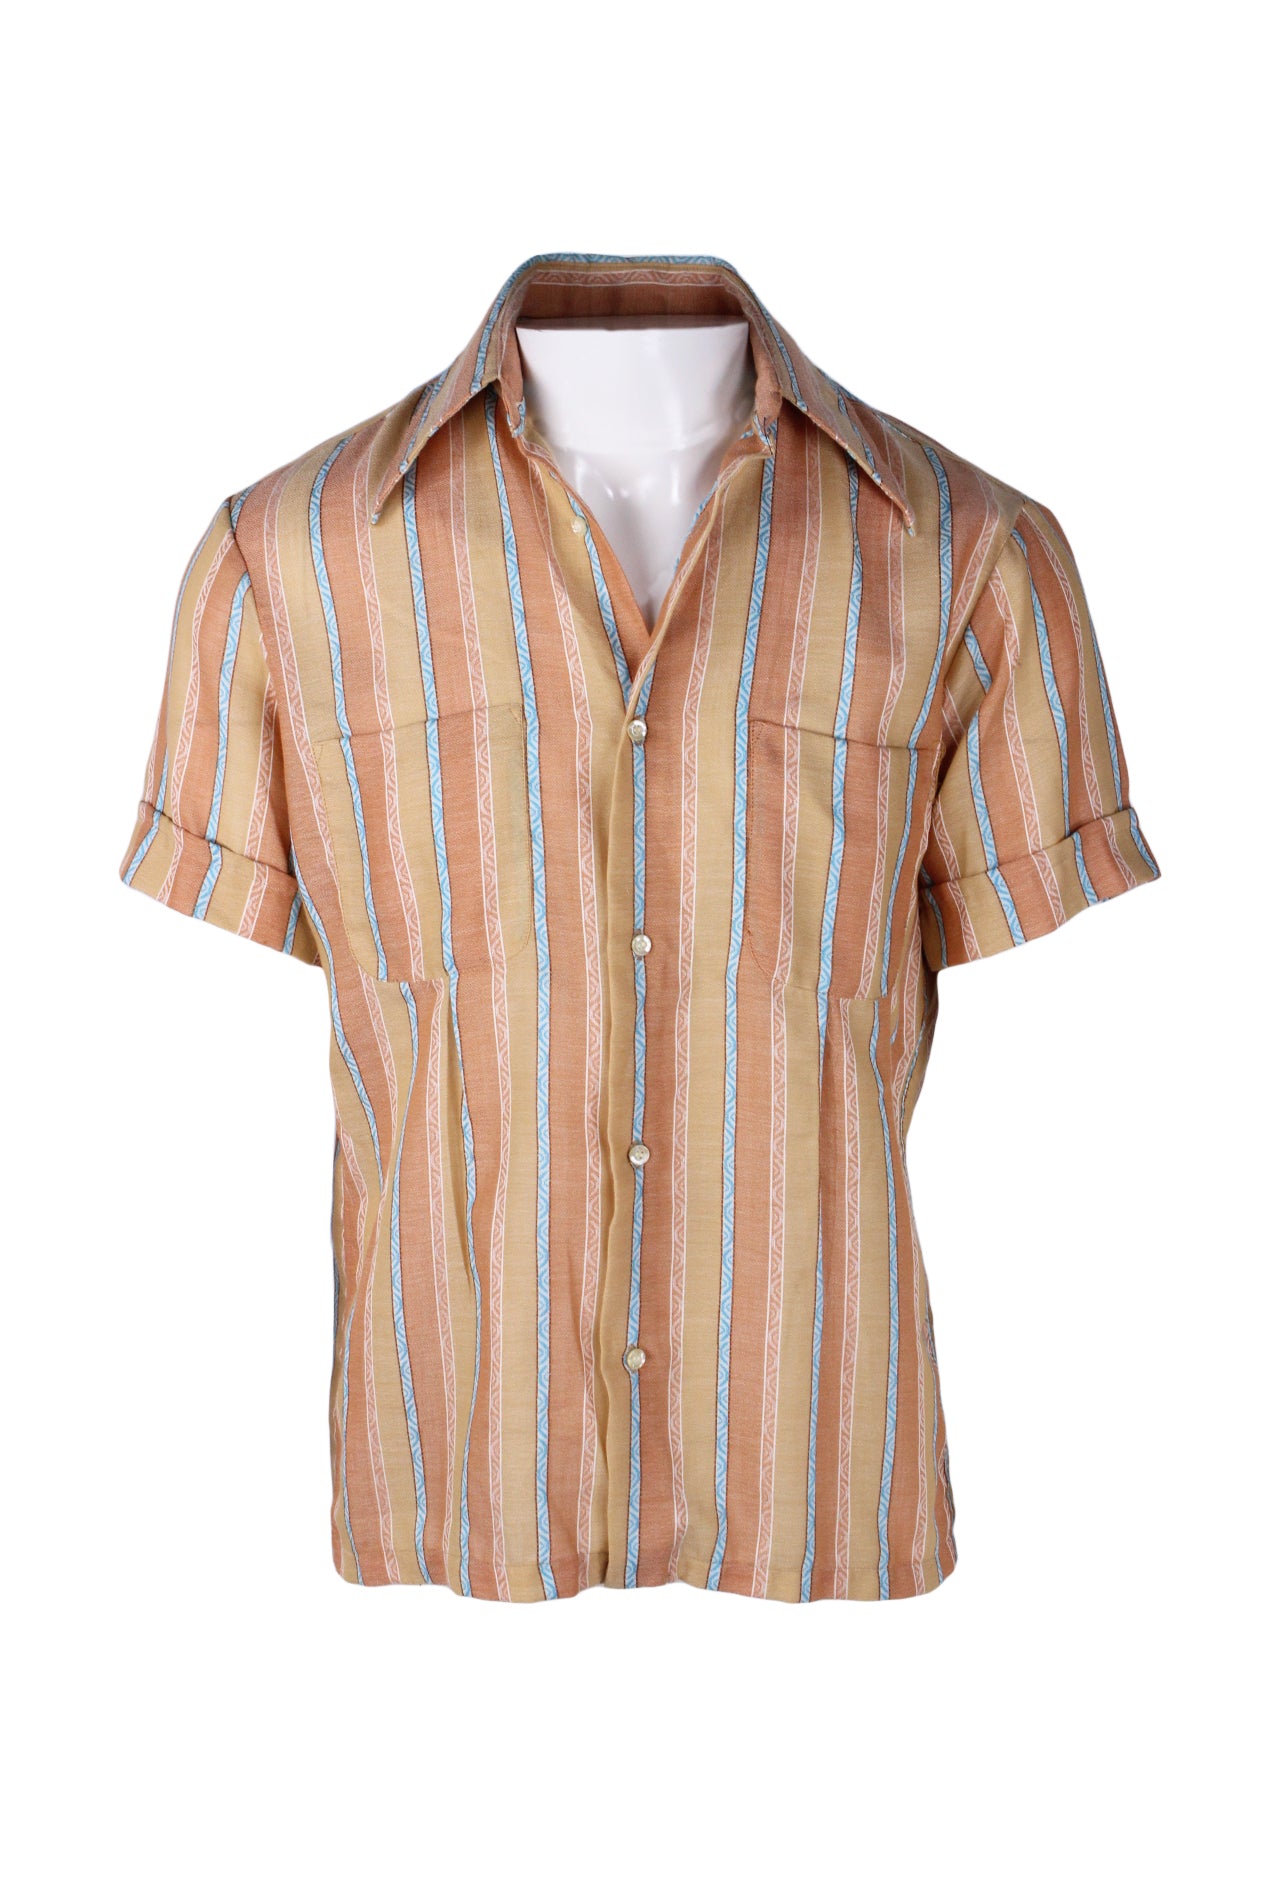 front view of vintage jayson ‘darted’ beige/blue/multi striped short sleeve button up shirt. features double breasted pockets and 70’s style collar.